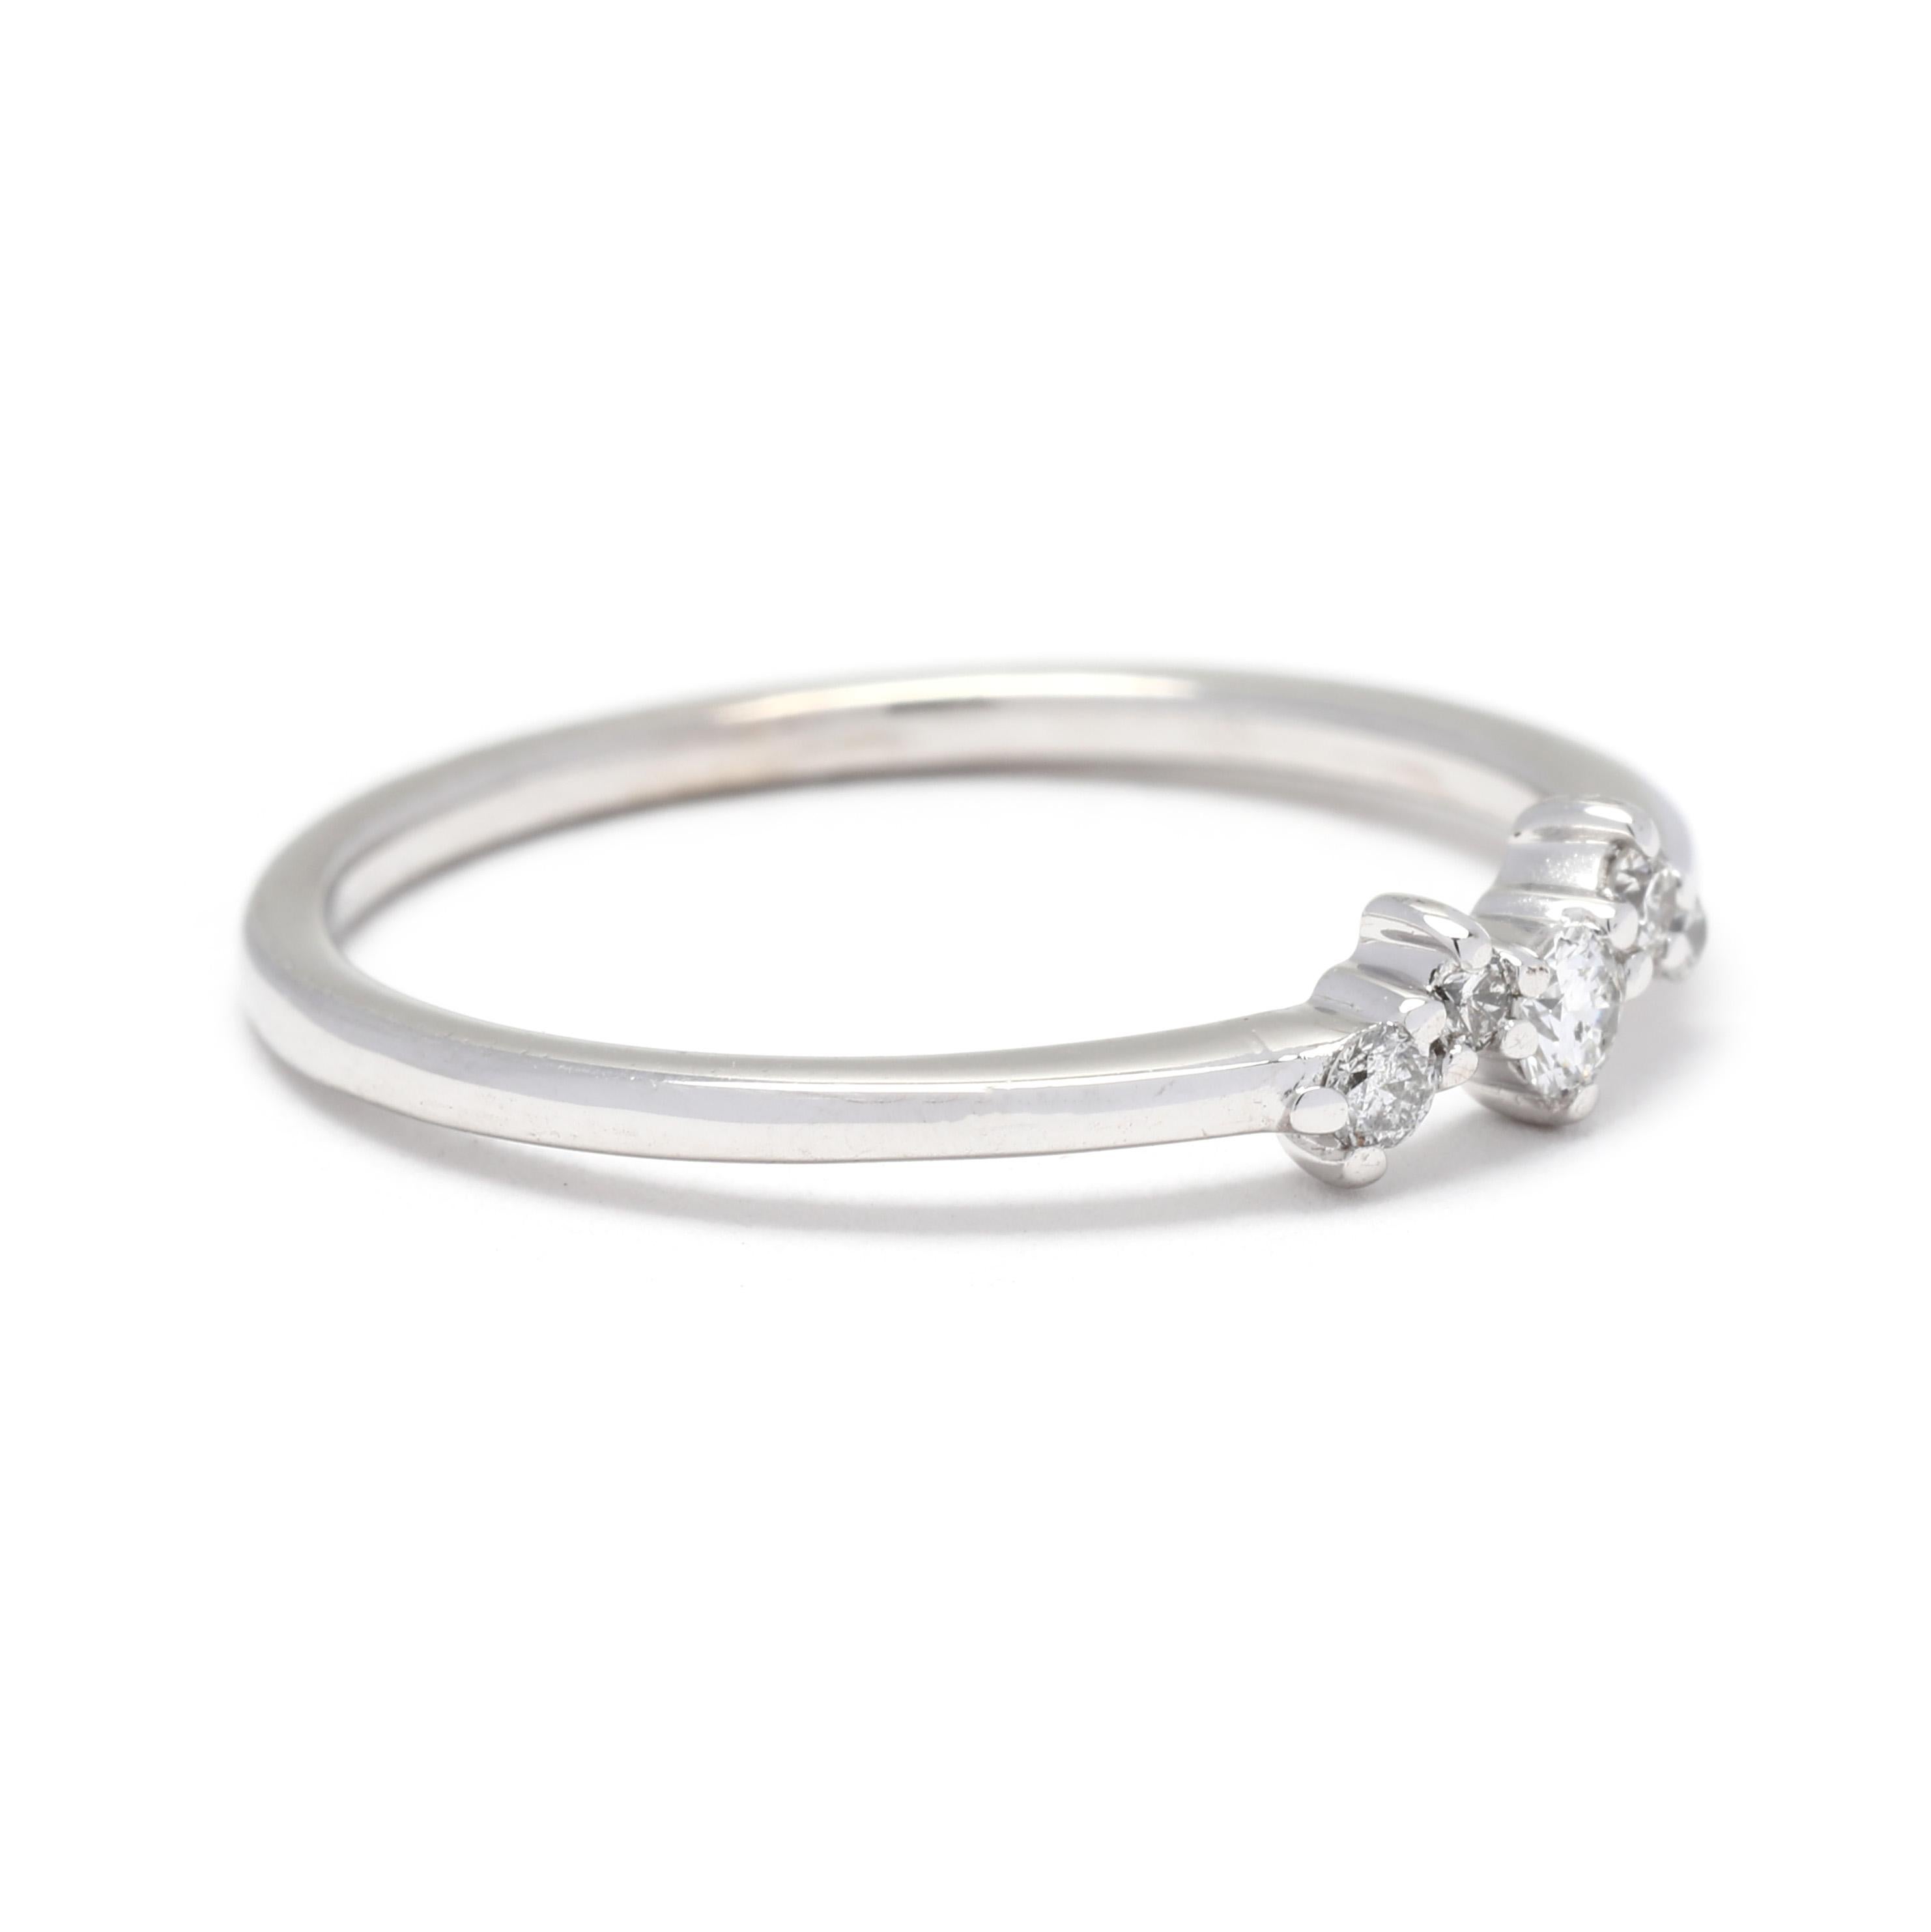 This dainty and delicate diamond band is crafted in 10K white gold and features a total weight of 0.10ctw diamonds. The scattered arrangement of diamonds gives this ring a unique and modern look. With a ring size of 6.75, it is the perfect fit for a